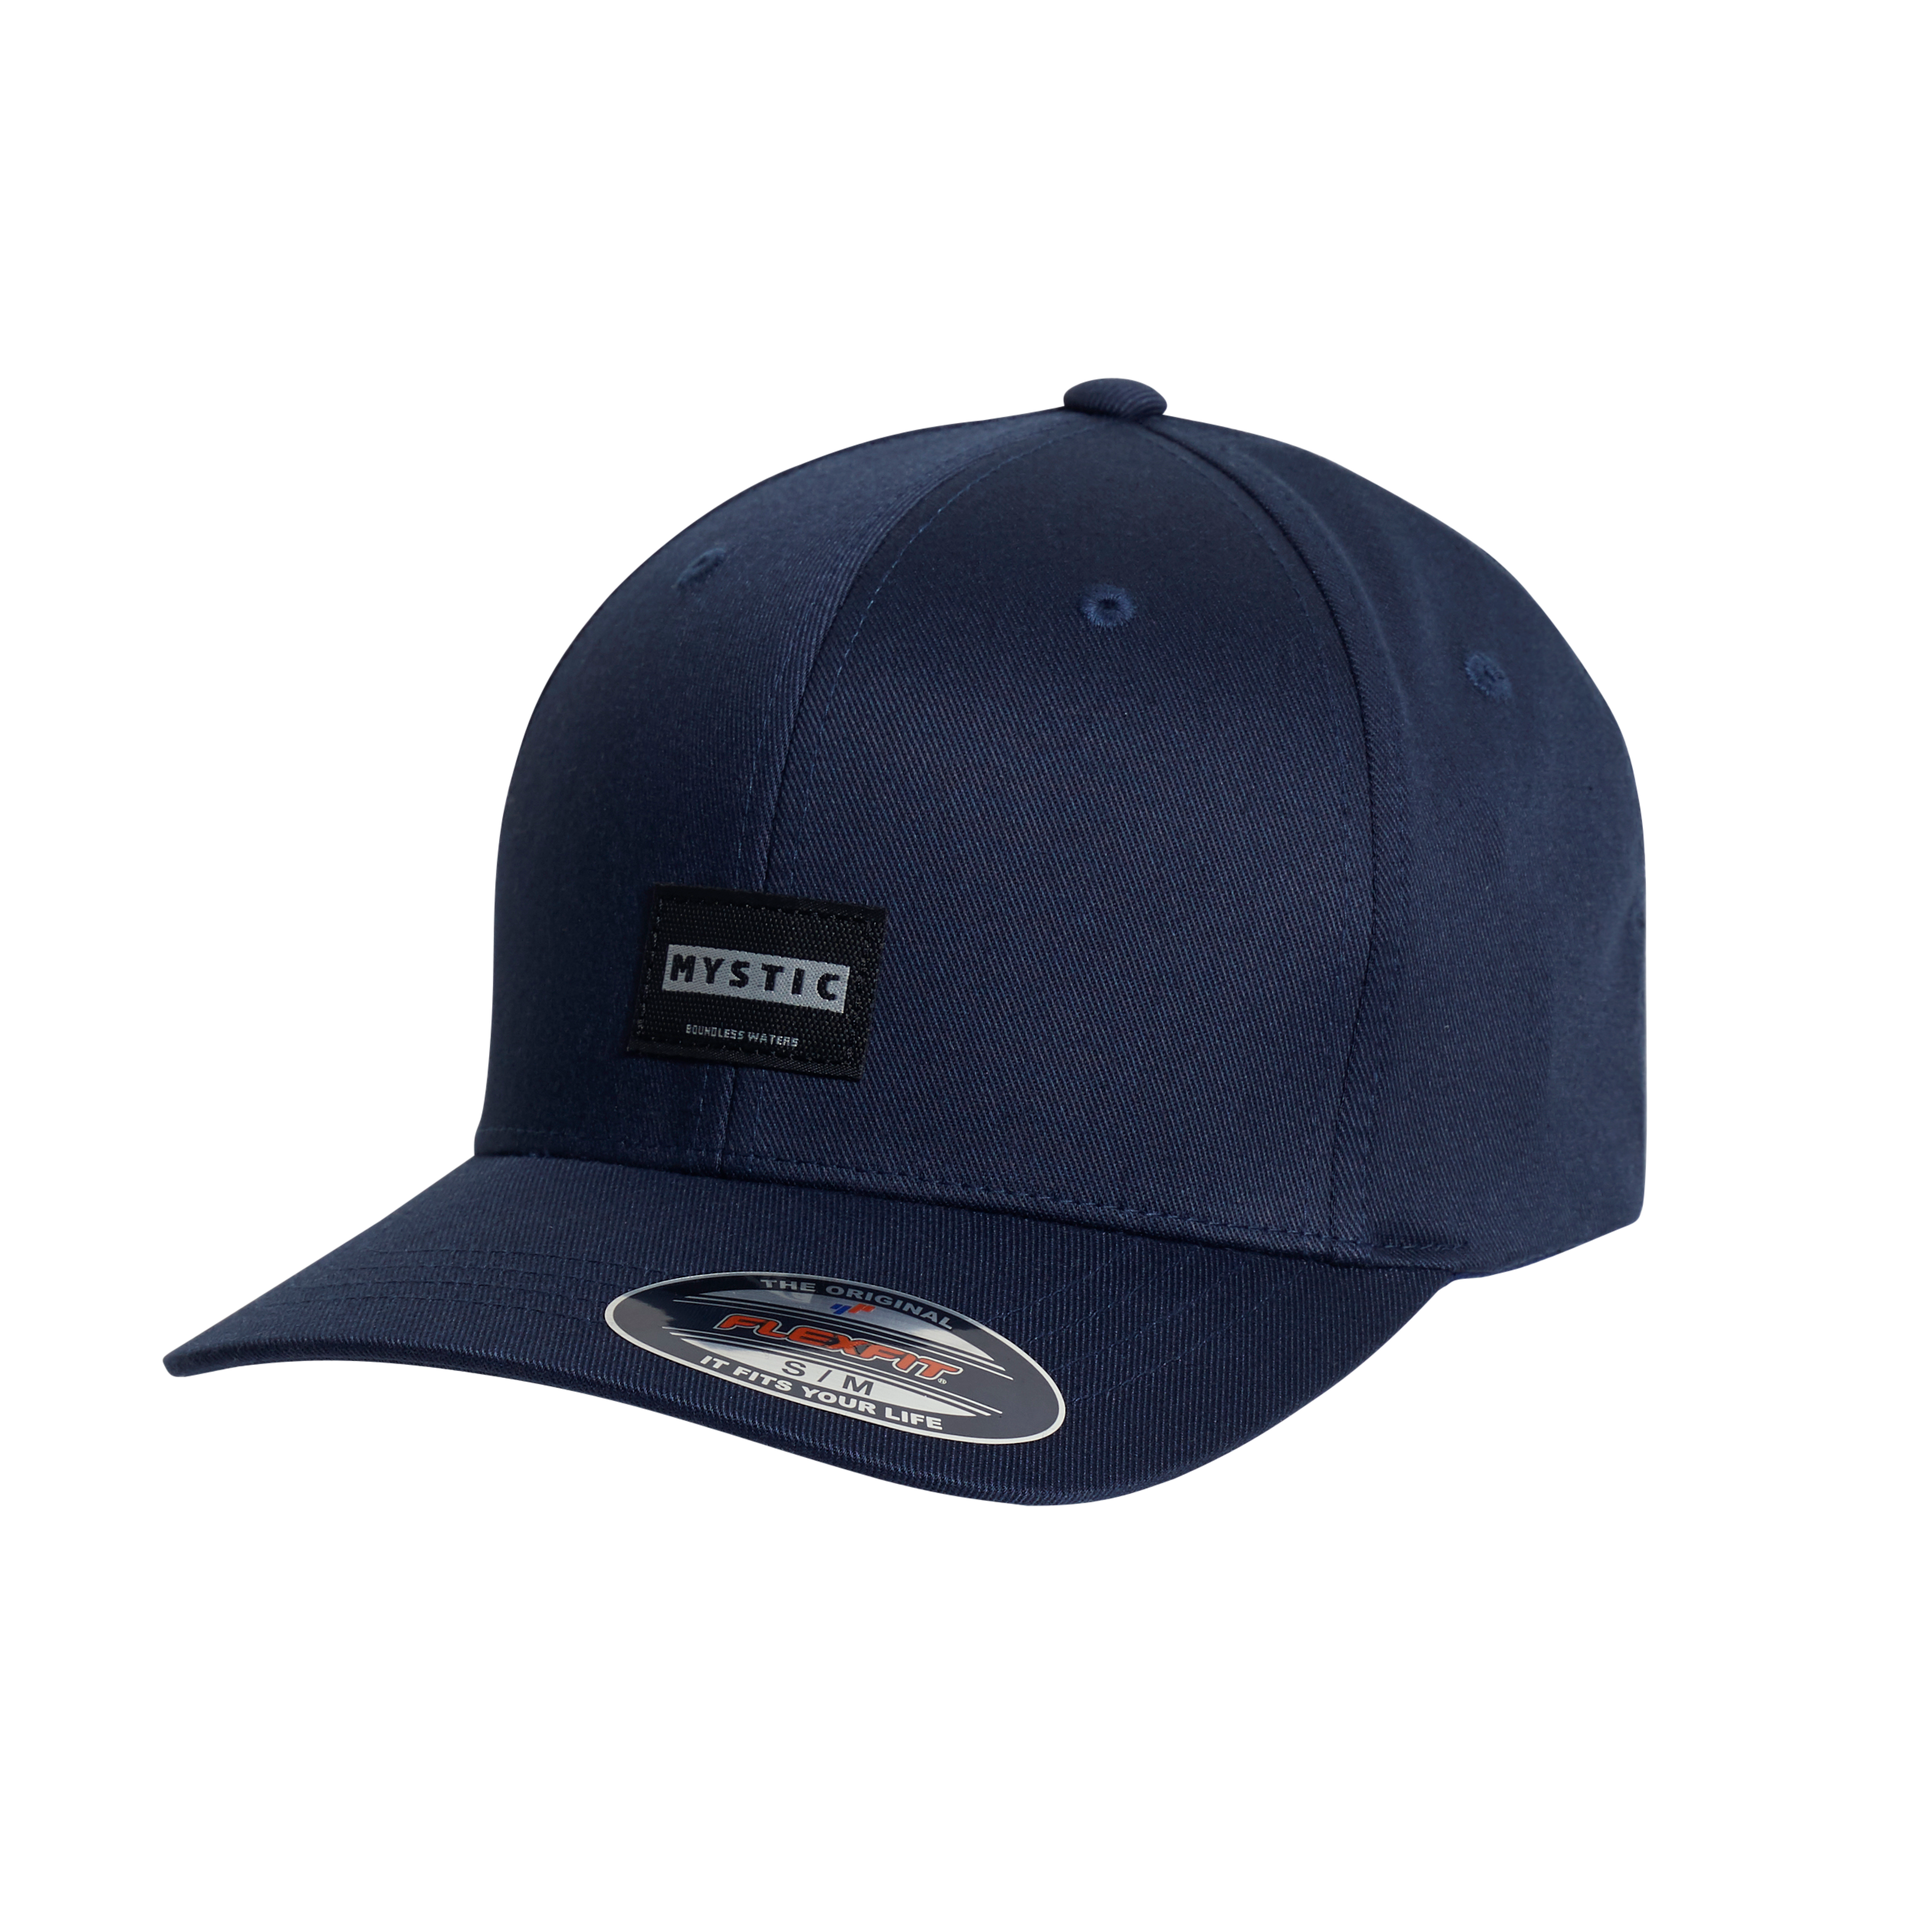 Product_image_1_Navy